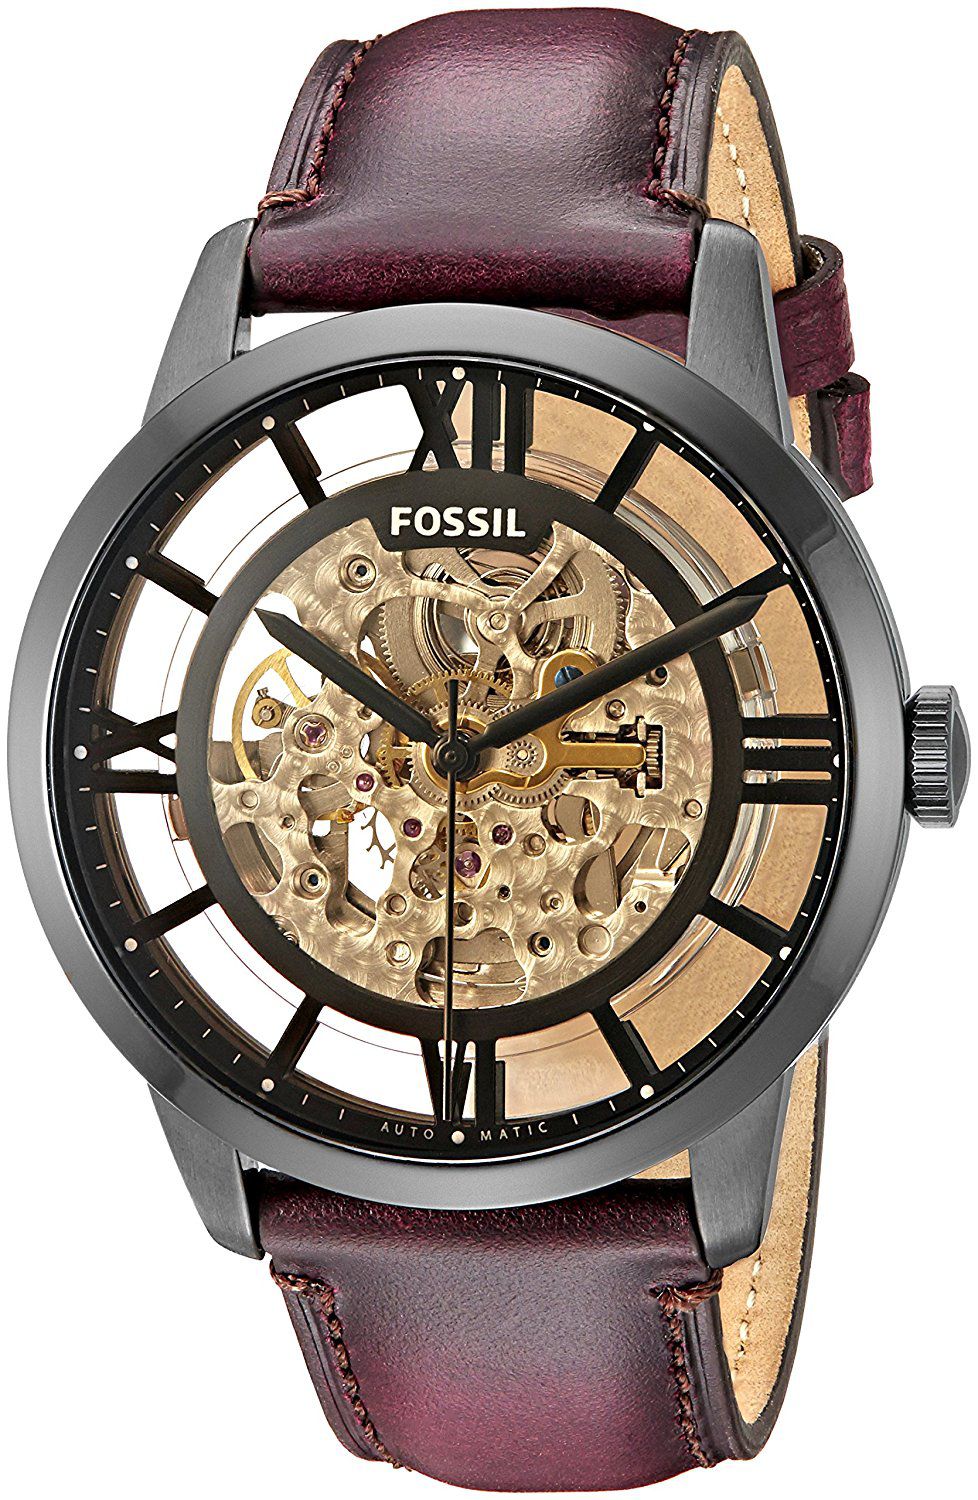 Fossil Men's ME3098 Analog Display Automatic Self Wind Brown Watch ...